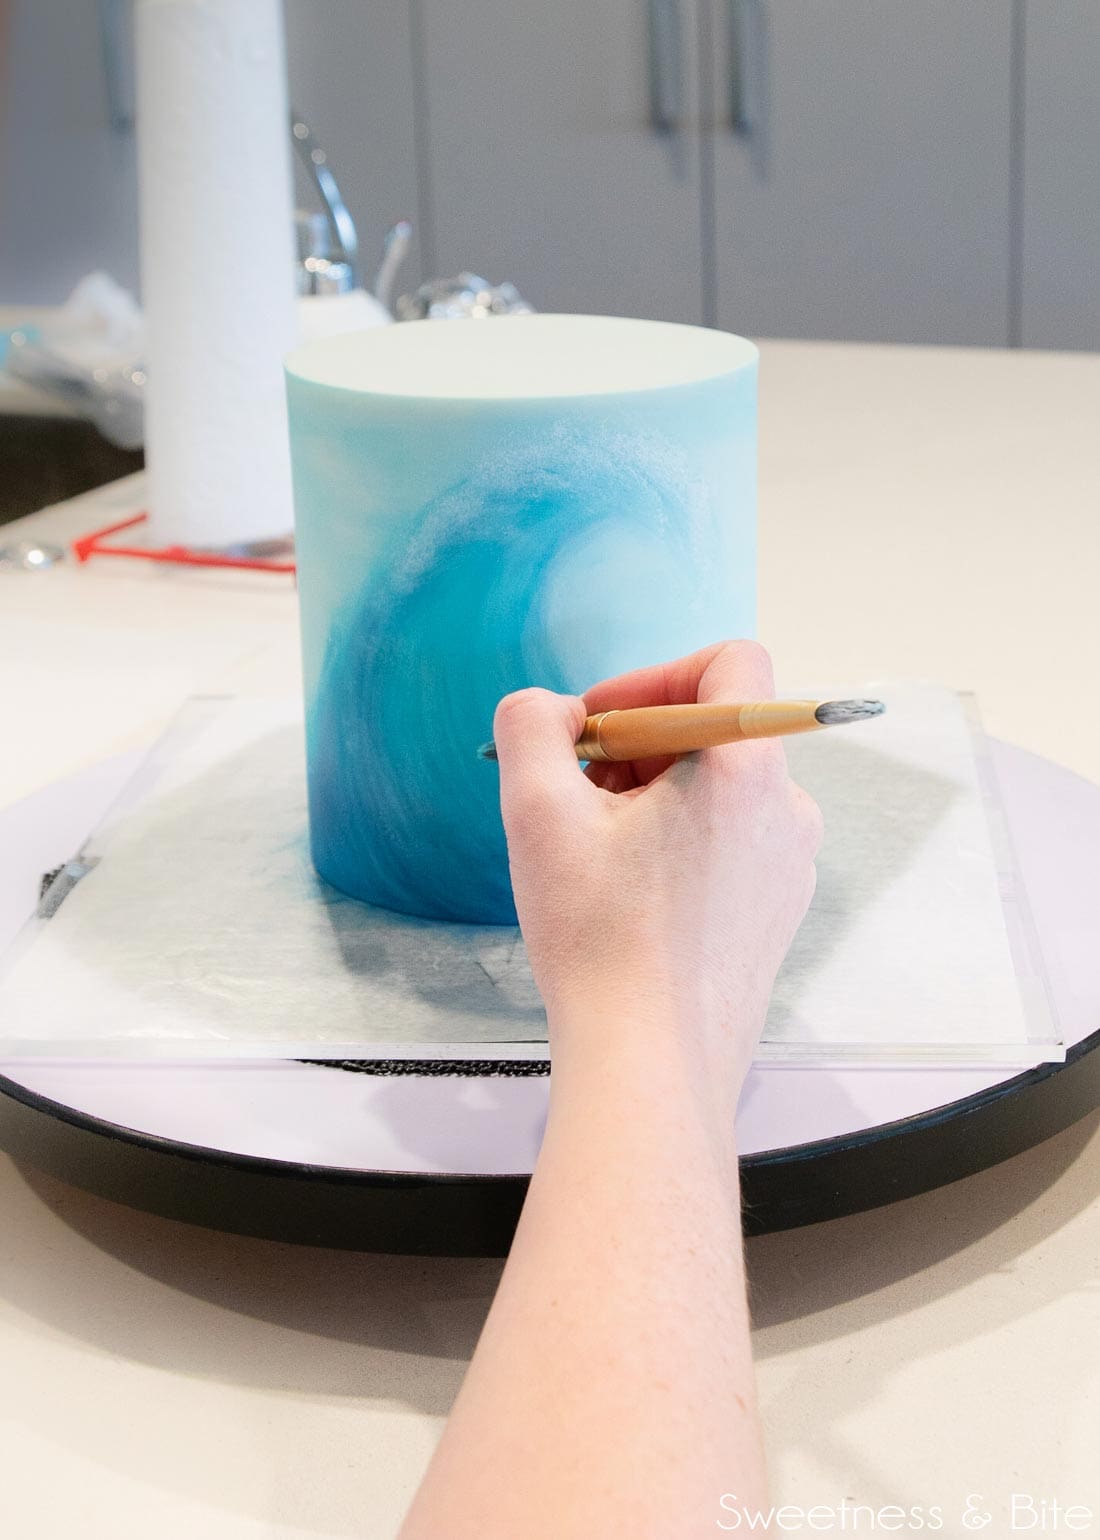 Painting a wave on a blue cake, wrist resting on the edge of a turntable.